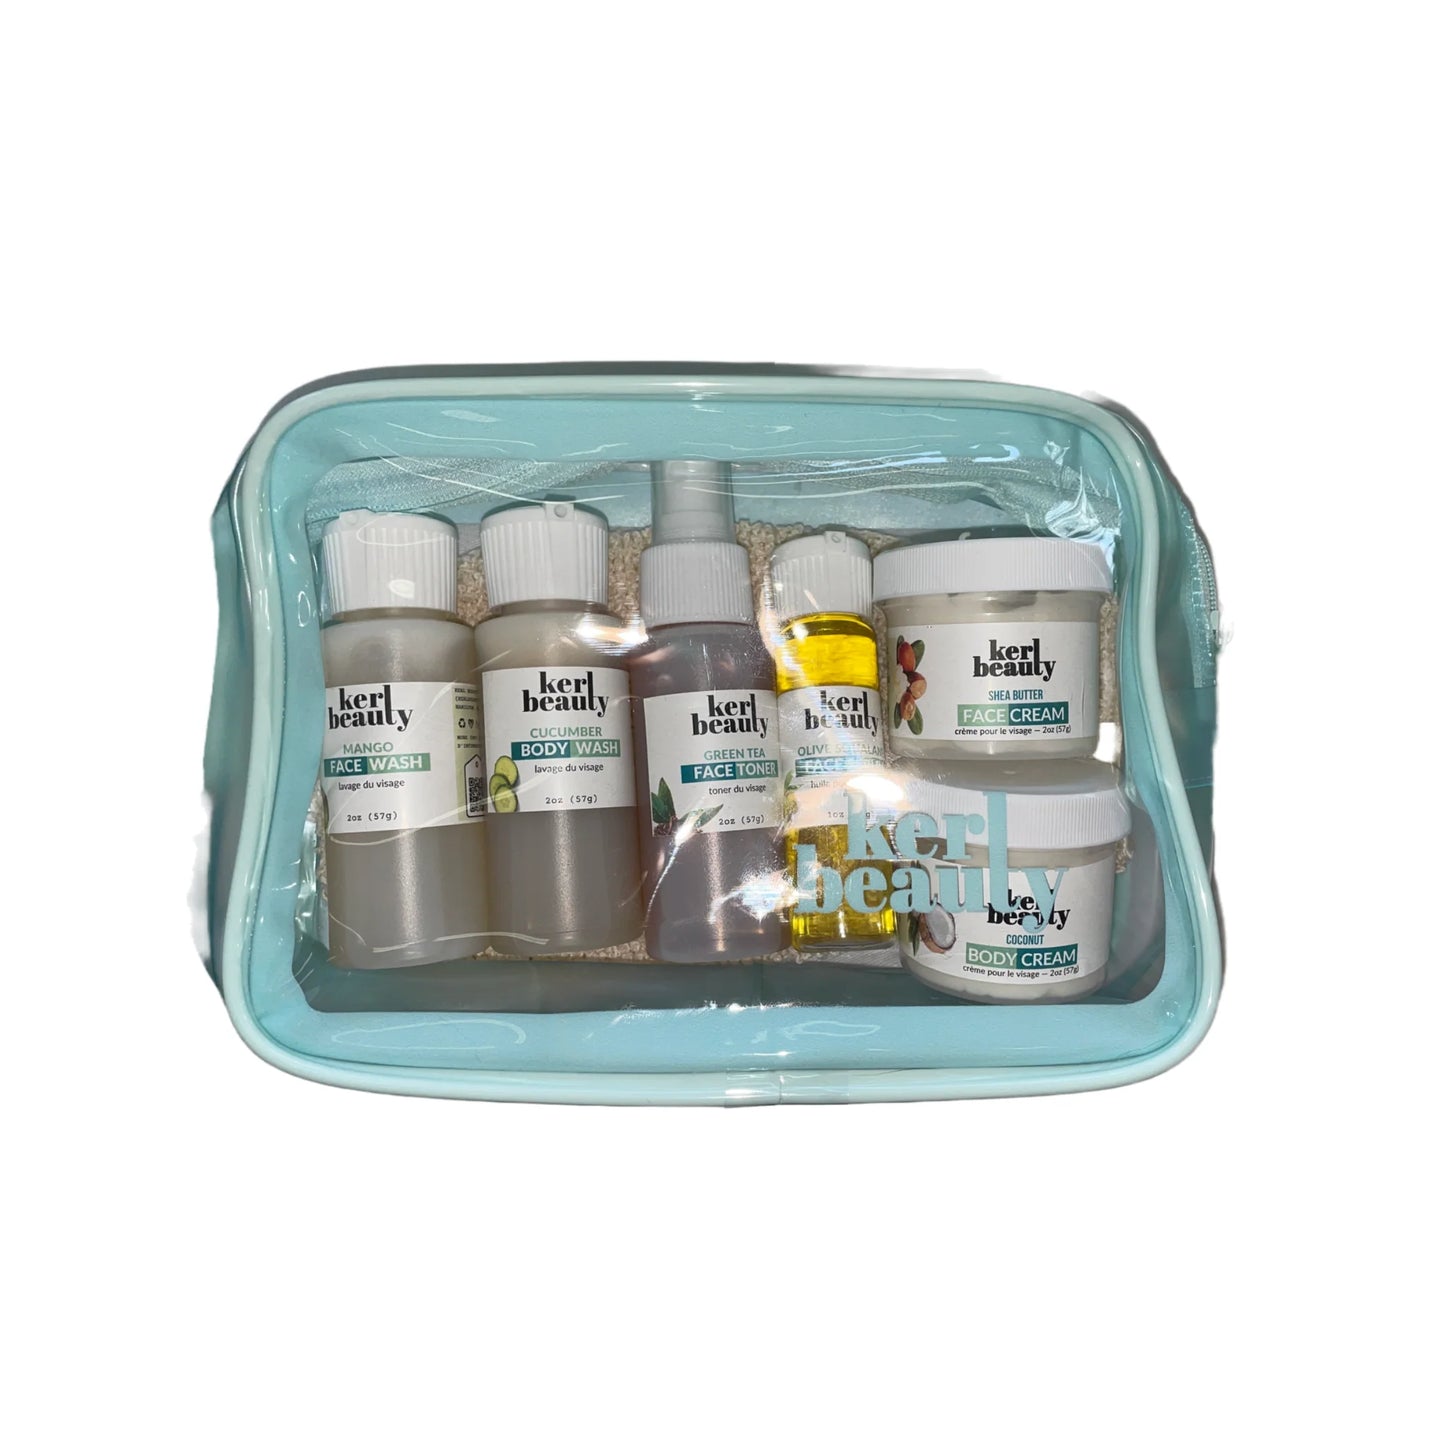 Skincare essentials kit by Kerl Beauty